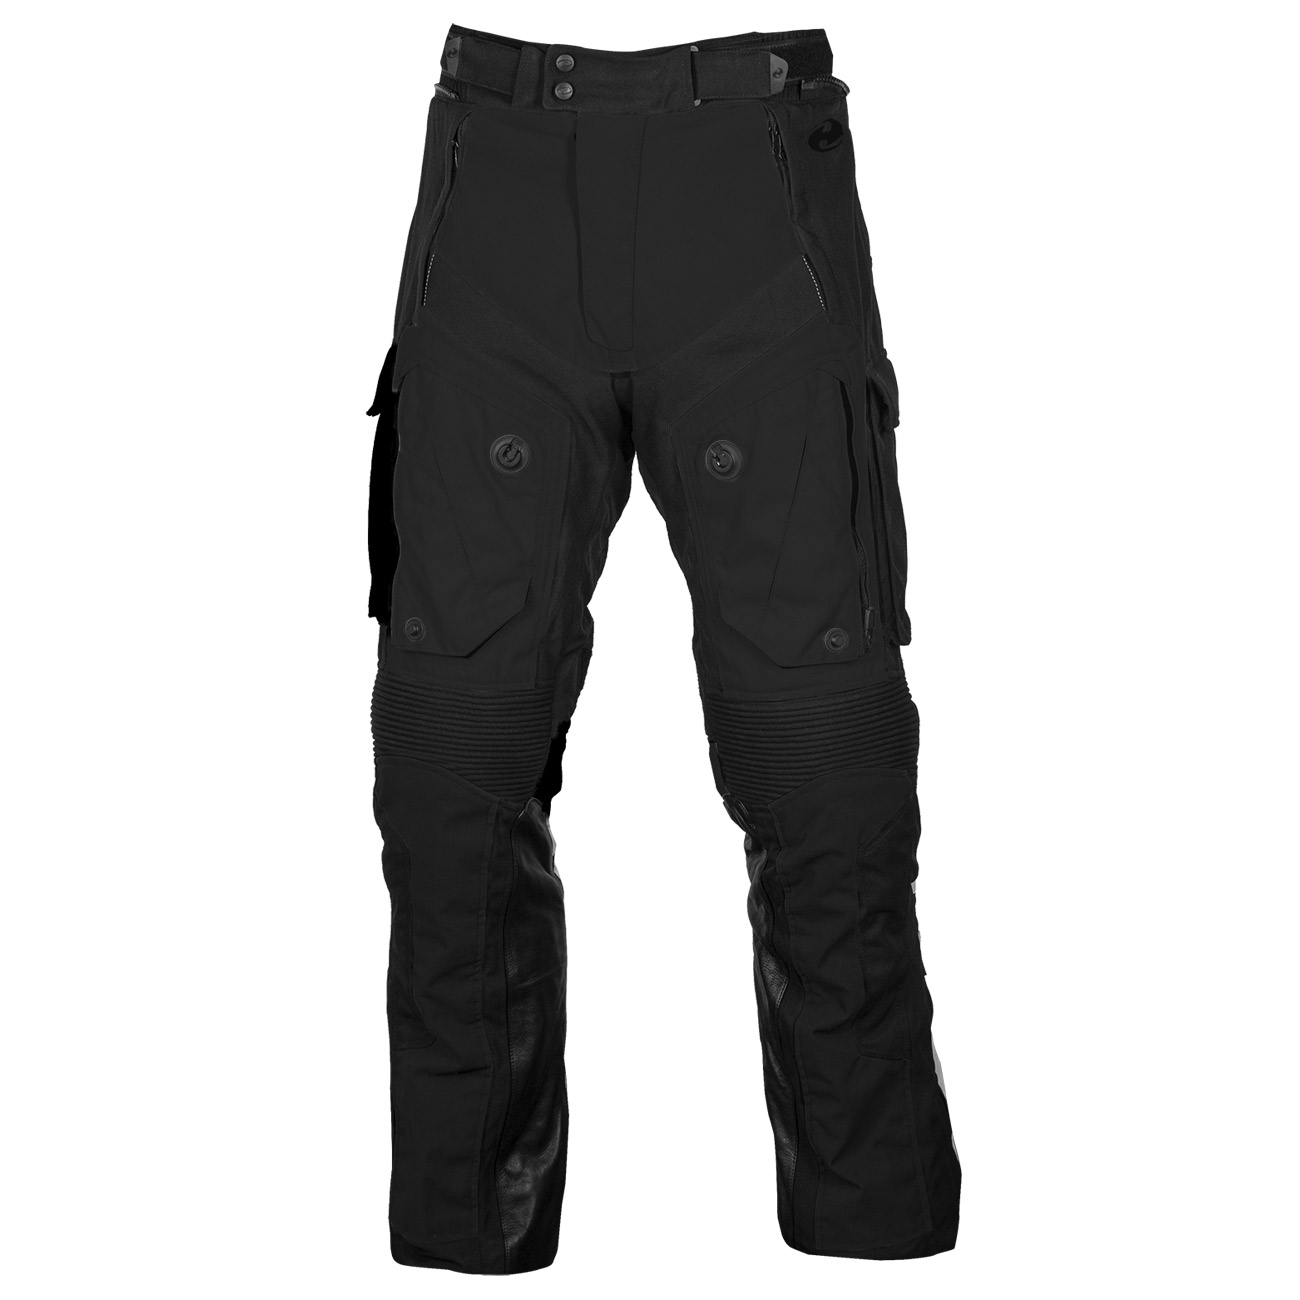 Tridale Base Adventure trousers